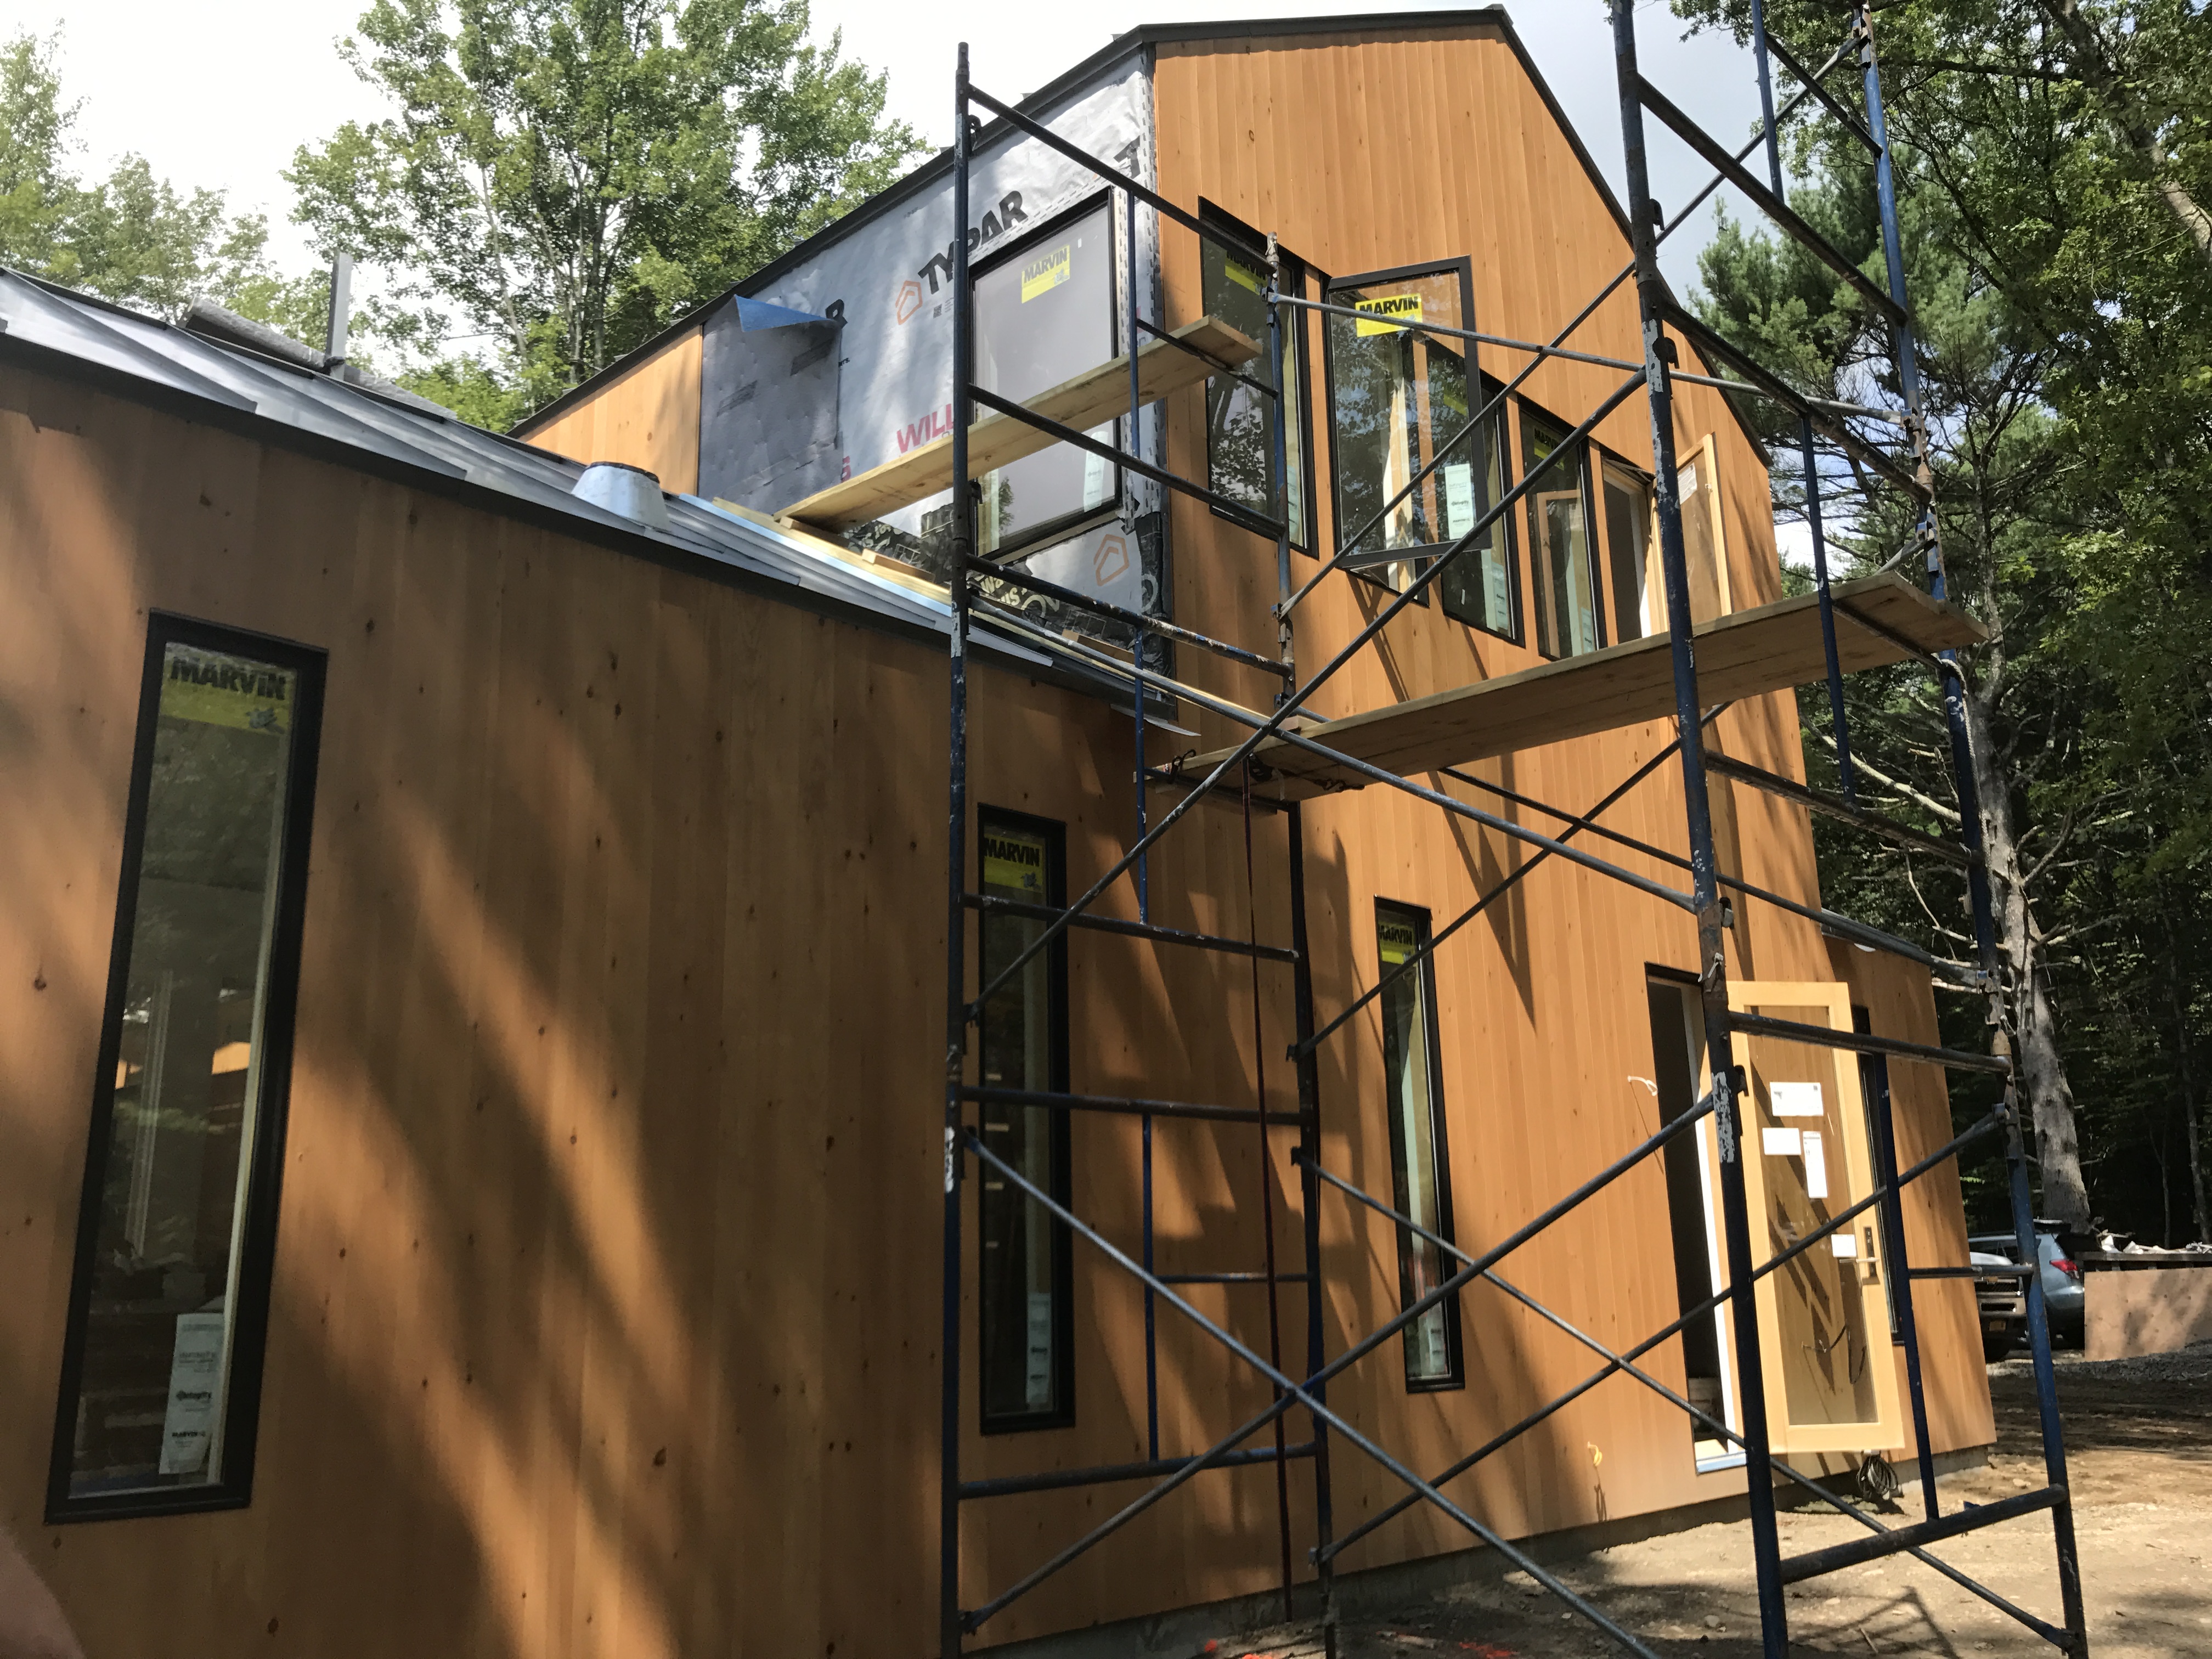 Modern Home Under Construction - New Homes in the Hudson Valley - Chalet Perche Construction Update